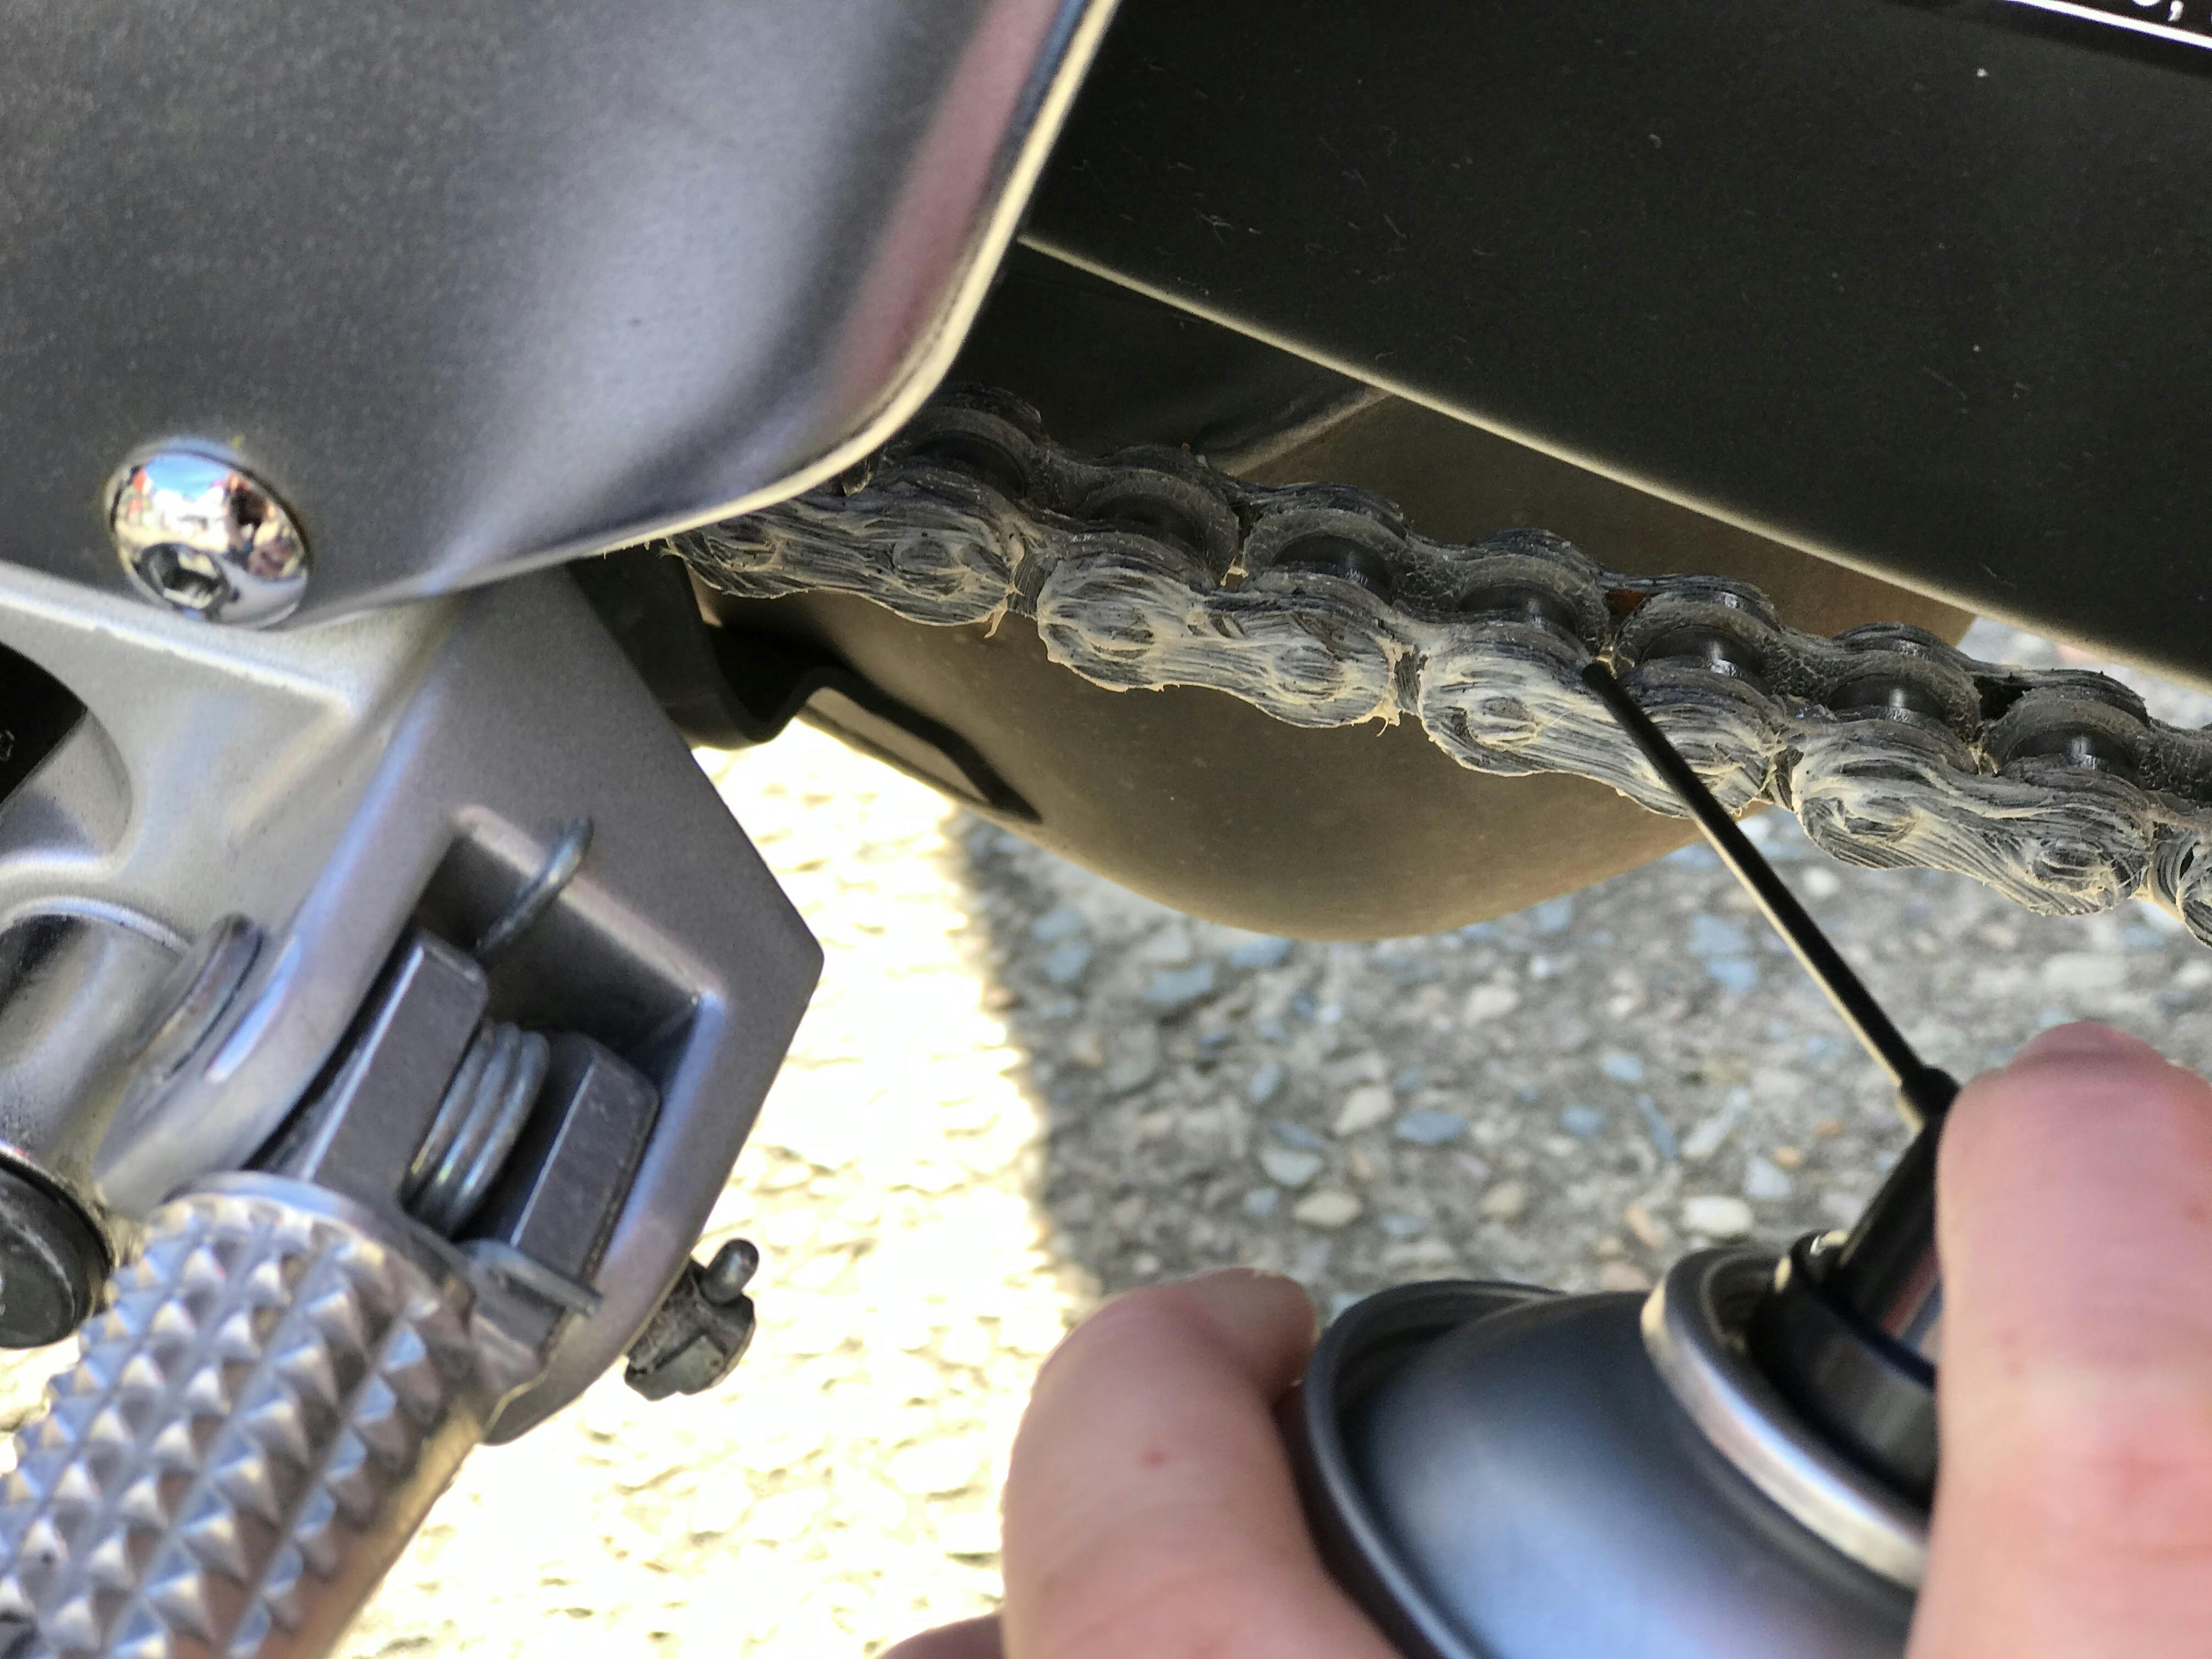 Straw on chain lube chain can being used on a motorcycle